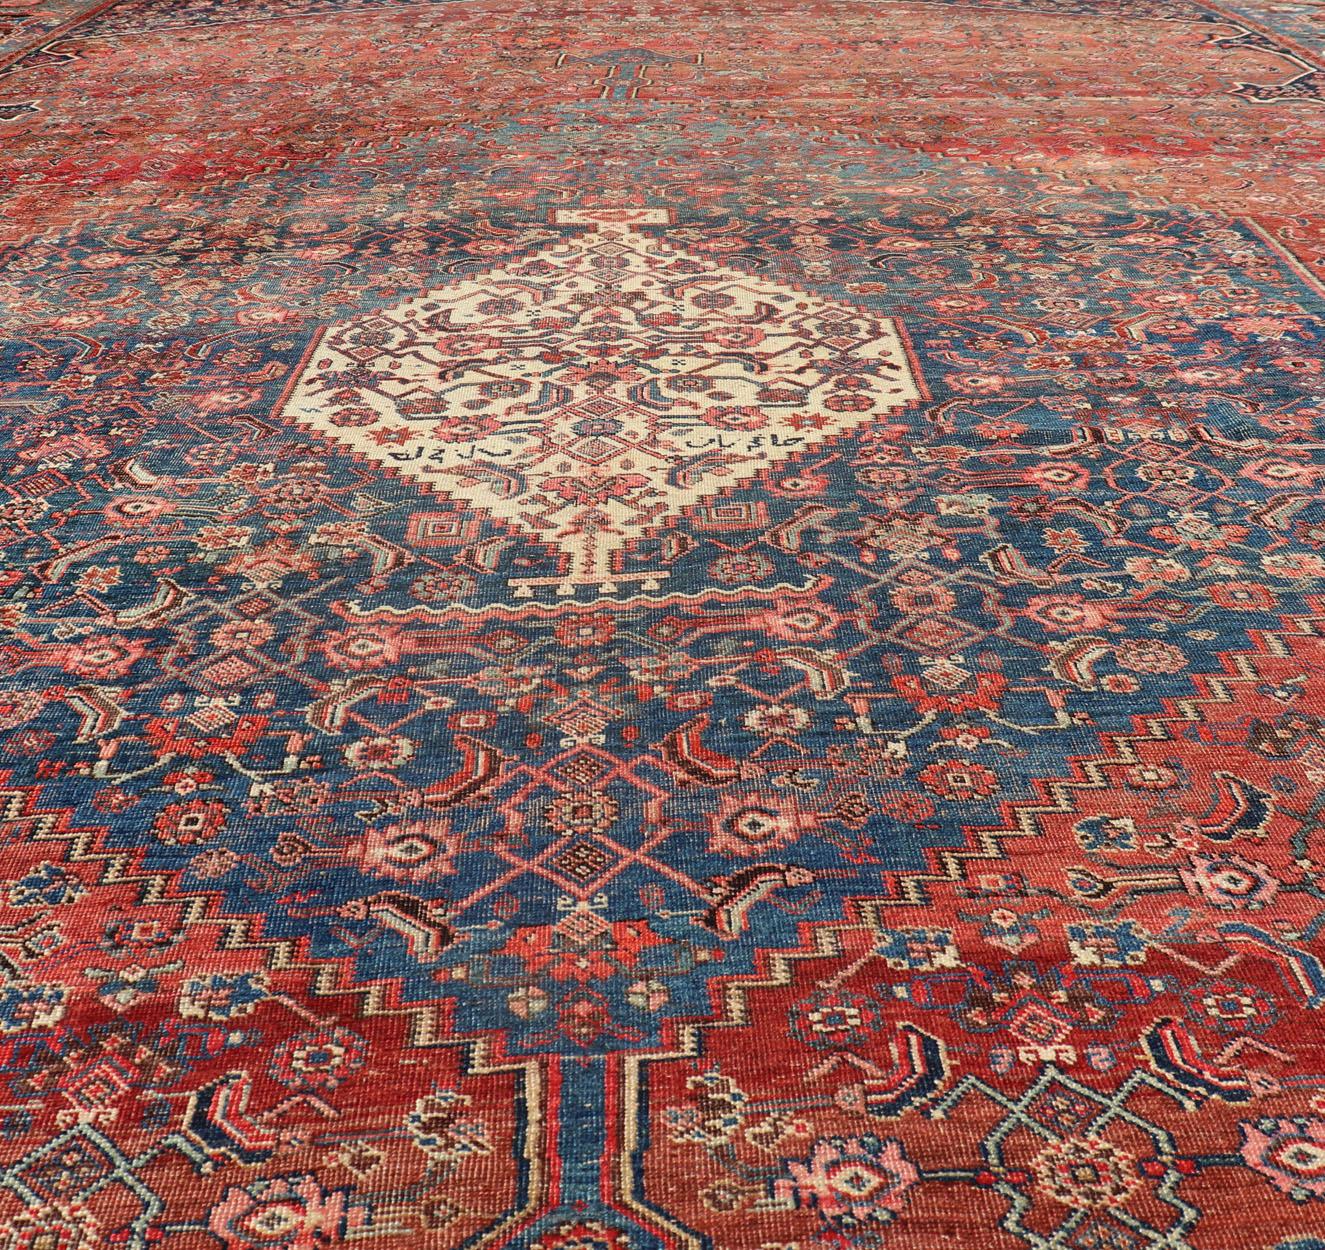 Very Large Antique Persian Bidjar Rug in Multi Shades of Blue, Tera-Cotta & Red In Good Condition For Sale In Atlanta, GA